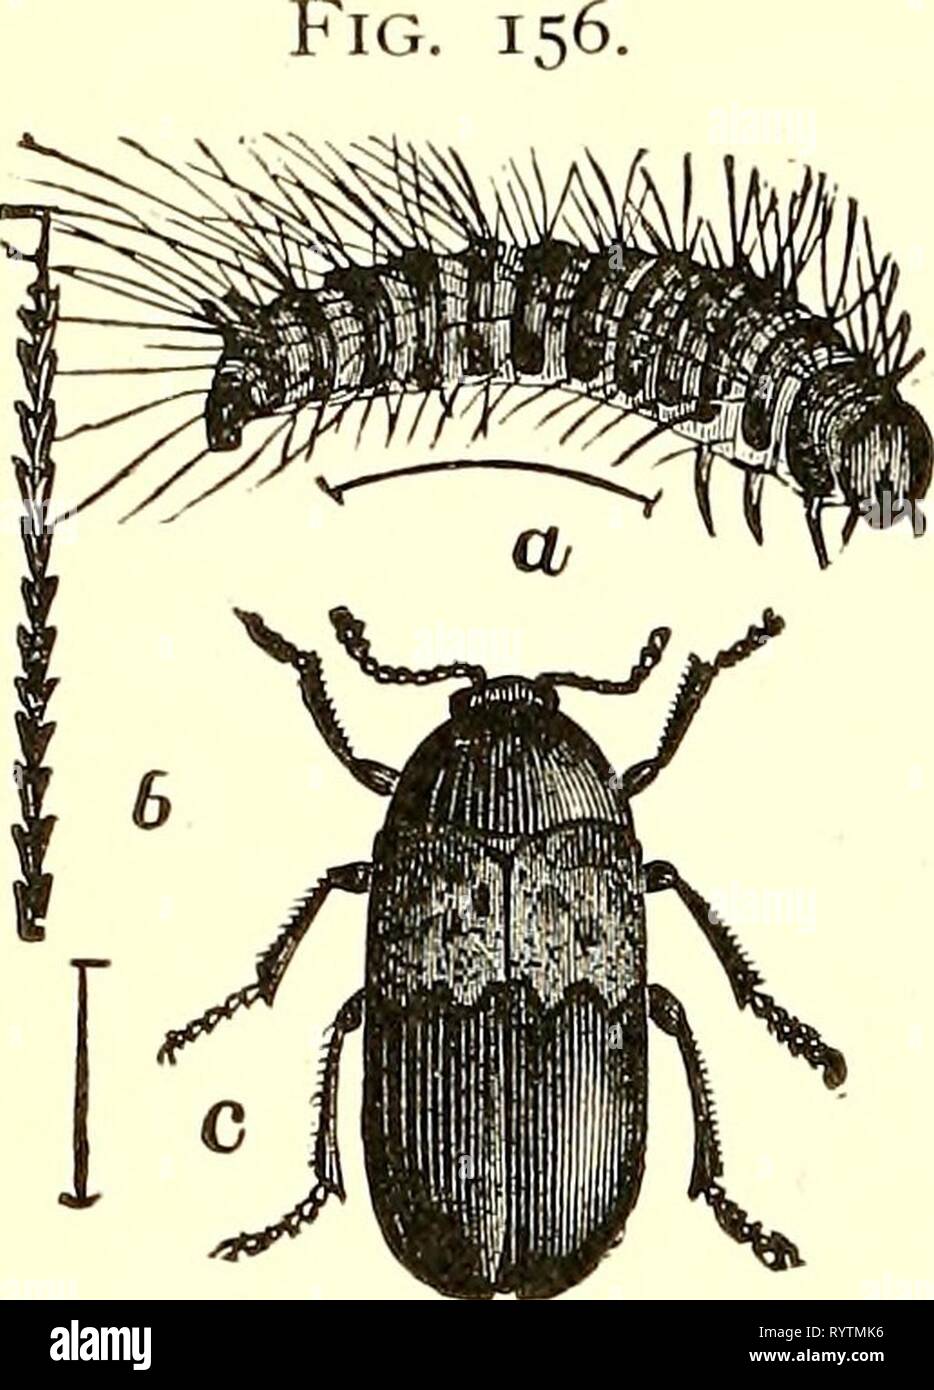 Economic entomology for the farmer Economic entomology for the farmer and fruit-grower [microform] : and for use as a text-book in agricultural schools and colleges . economicentomolo00insmit Year: 1896  178 AN ECONOMIC ENTOMOLOGY.    The lardei'-beetle, Der^nes- tes laydariiis.—a, larva ; b, a single hair from larva ; c, adult beetle. These belong to the family Dermestidce, which contains such nuisances as the 'larder-beetles,' 'carpet-beetles,' and 'mu- seum-beetles.' The elytra, which cover the abdomen completely, are black or gray, usually ornamented with white or colored scales, which som Stock Photo